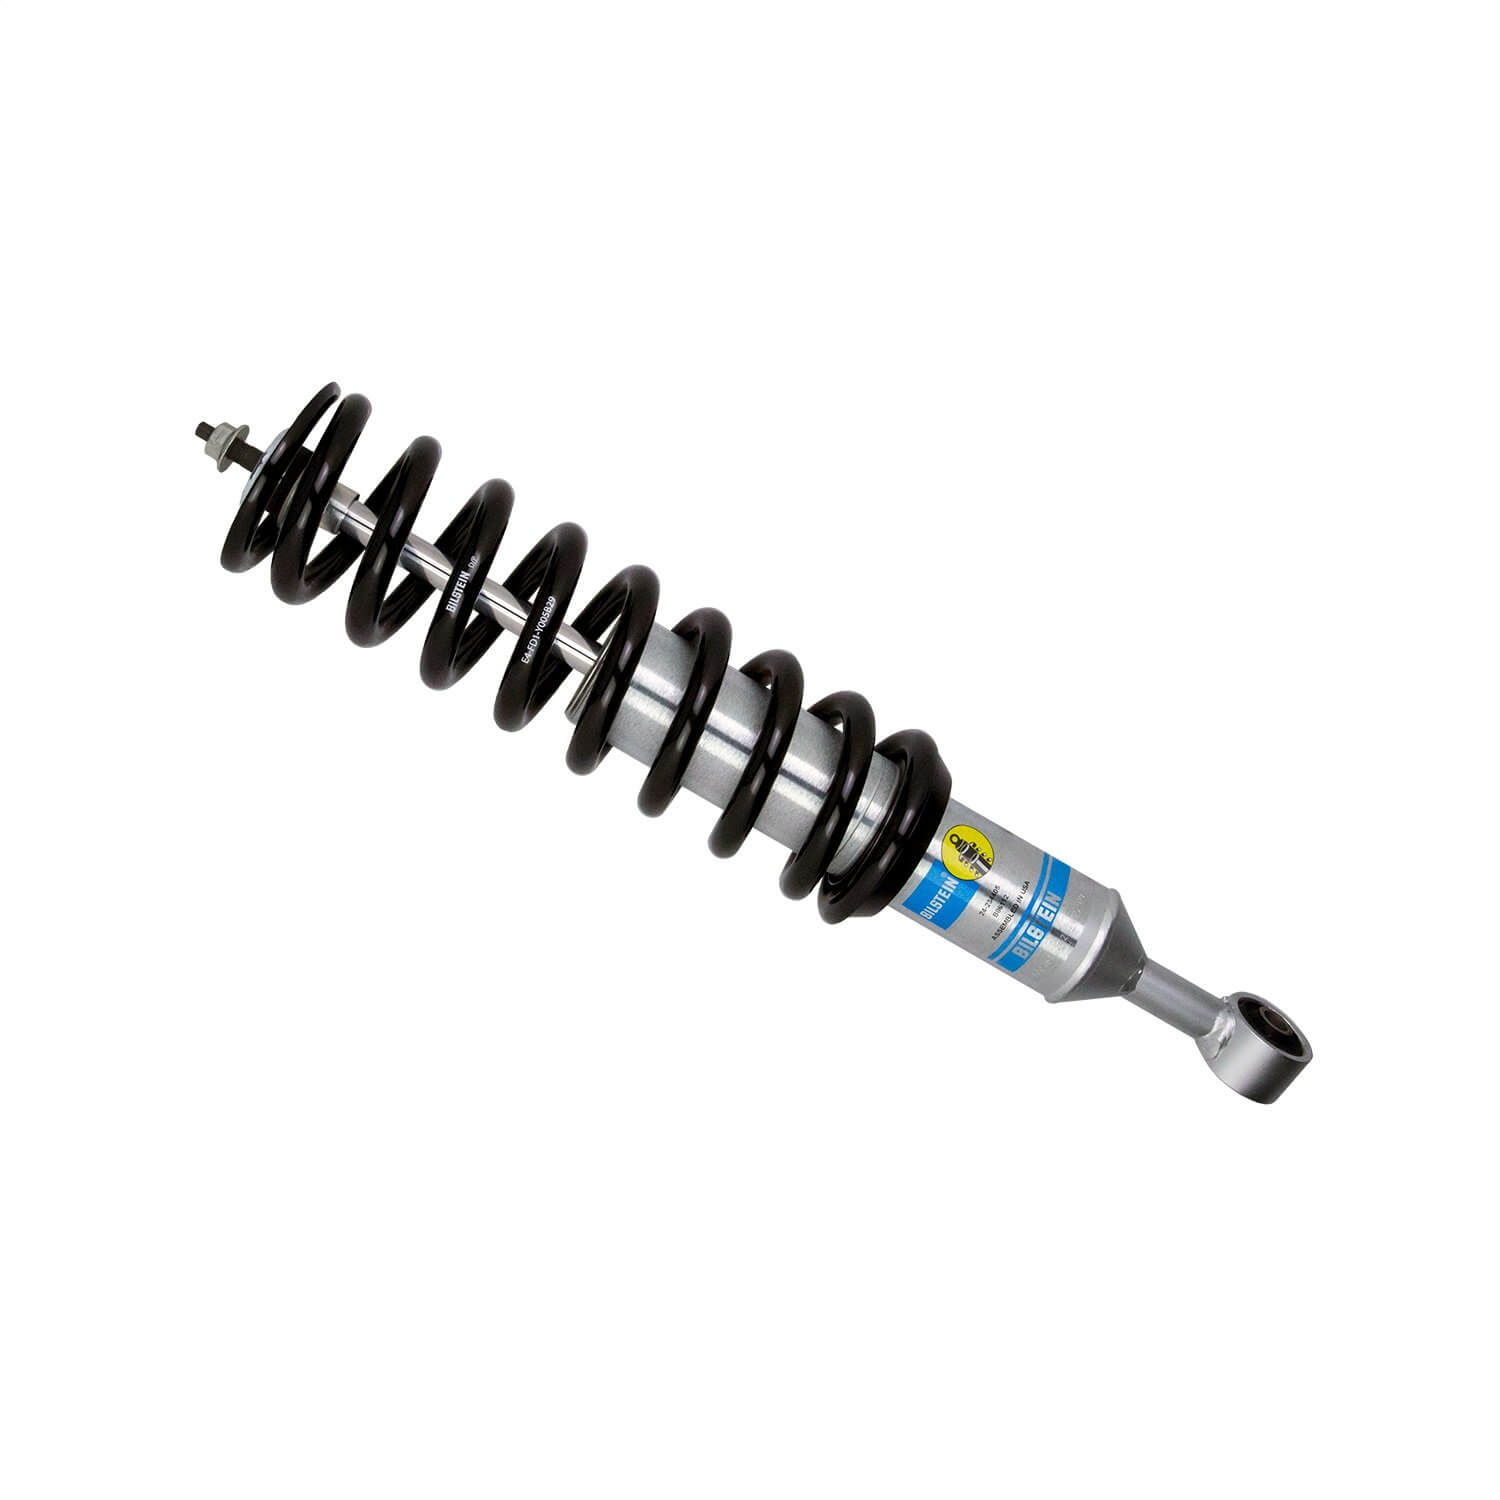 Bilstein's 6112/5160 Toyota Tacoma Suspension - The Dirt by 4WP